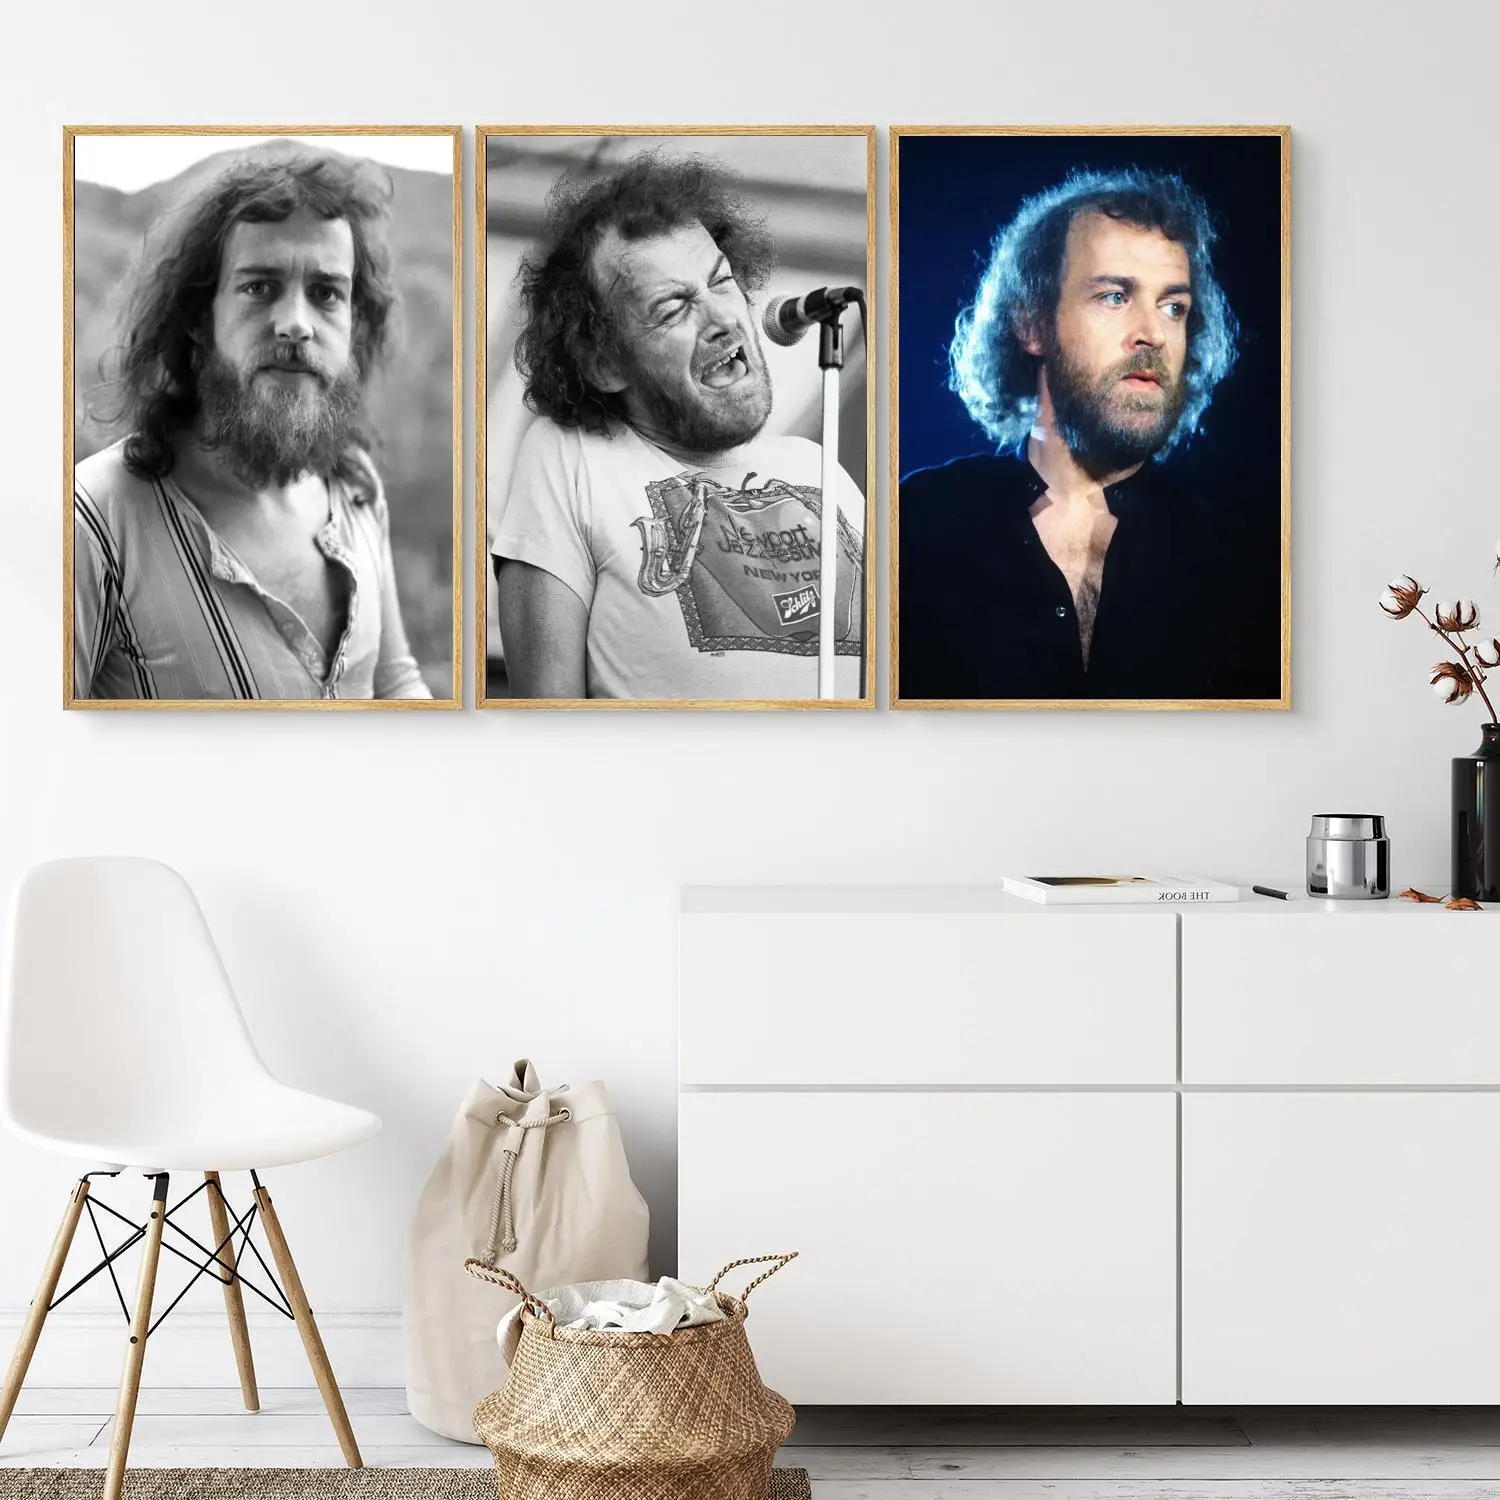 

Joe Cocker Poster Wall Art 24x36 Canvas Posters Decoration Art Personalized Gift Modern Family bedroom Painting